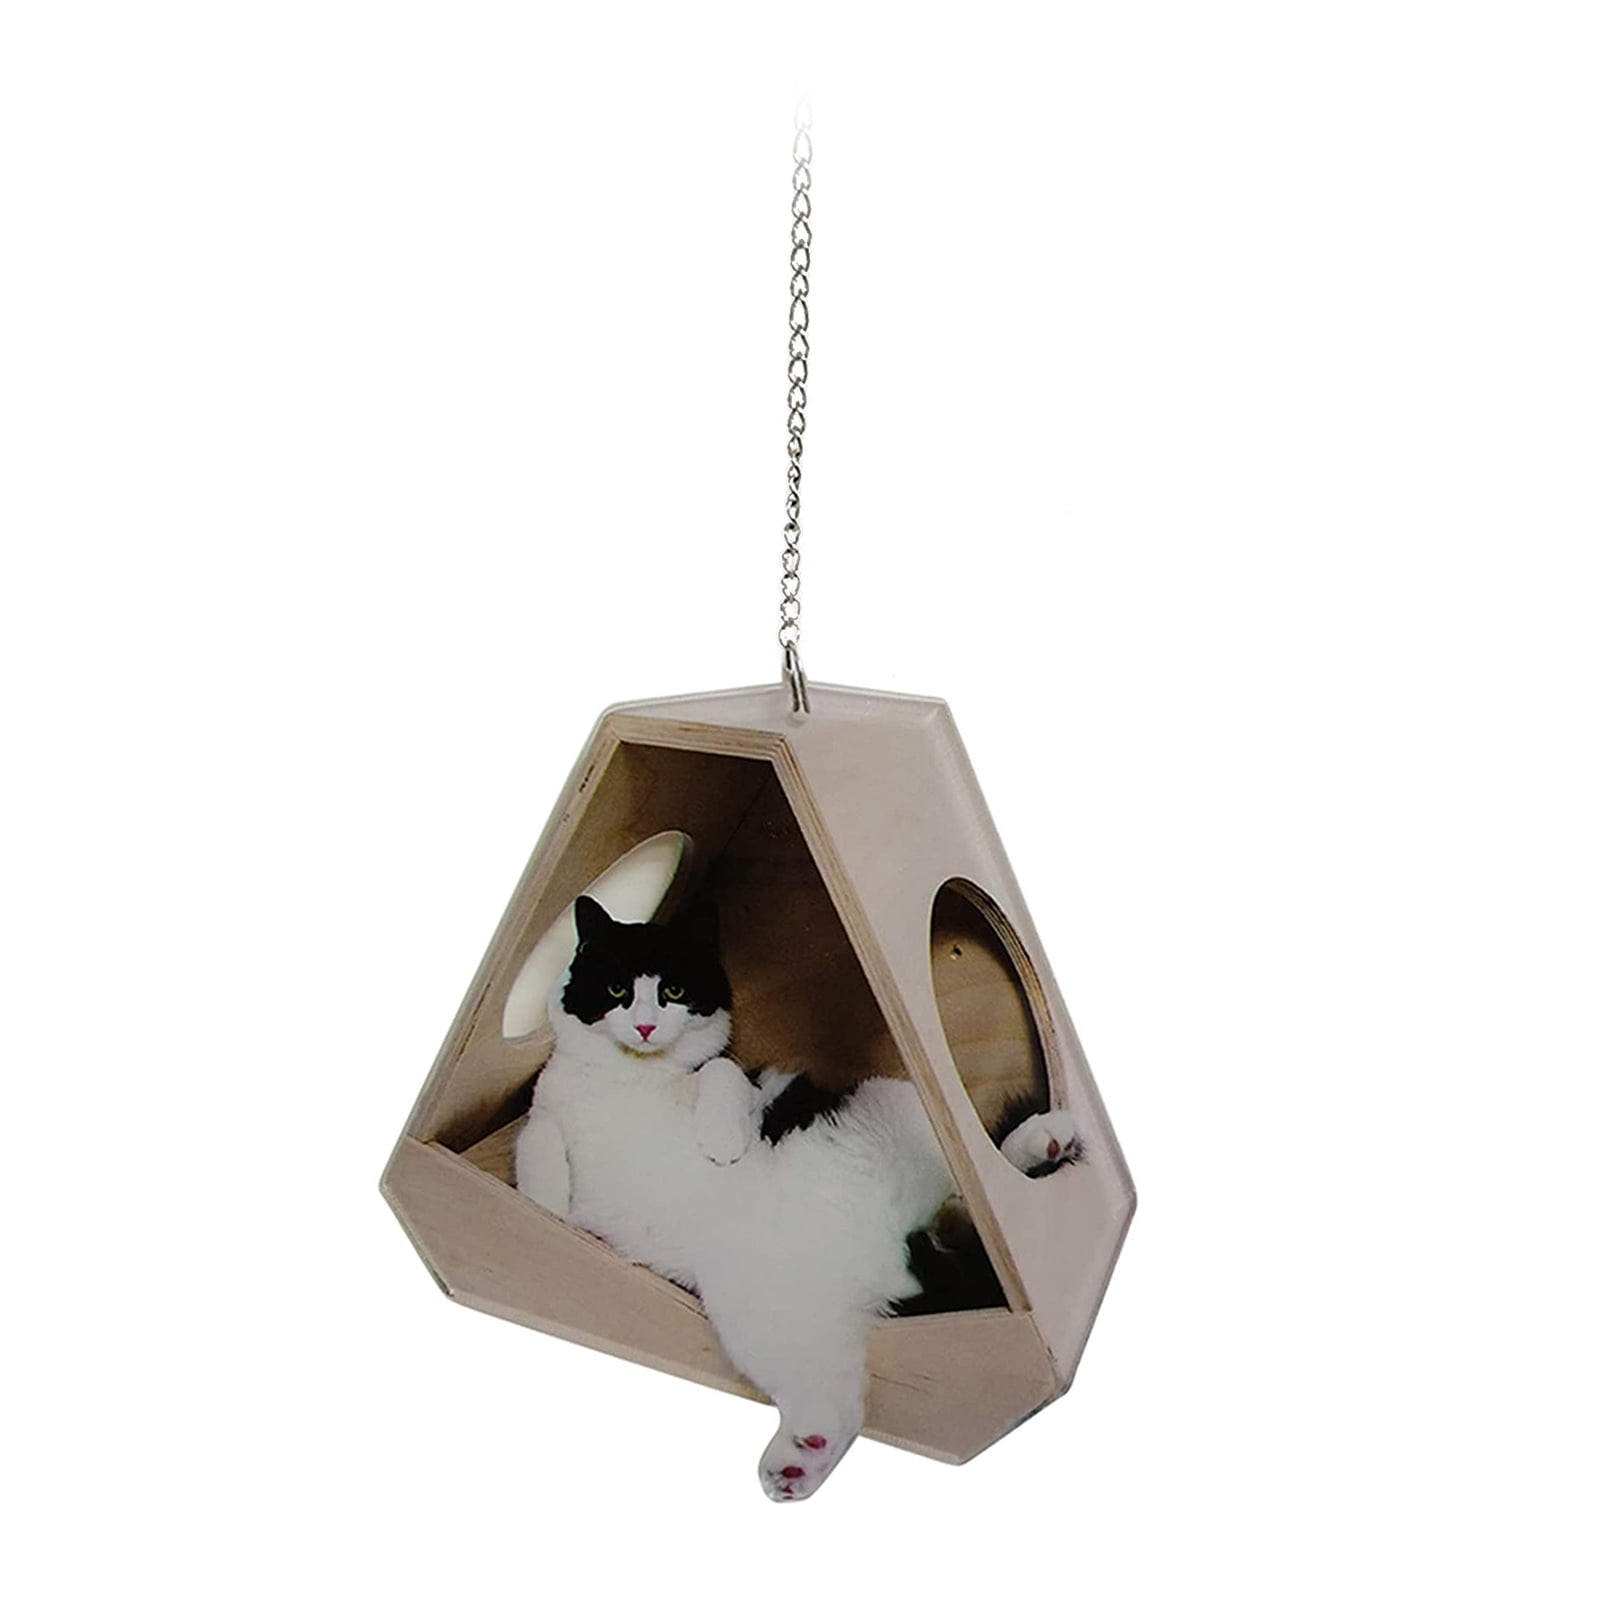 Acrylic Cat with Cabin Hanging Decor,Rear View Mirror Hanging Accessories Yangliu Lovely Funny Car Hanging Ornament Car Pendant Ornaments Interior Accessories 9.5x10.5 cm Home Window Hangings 